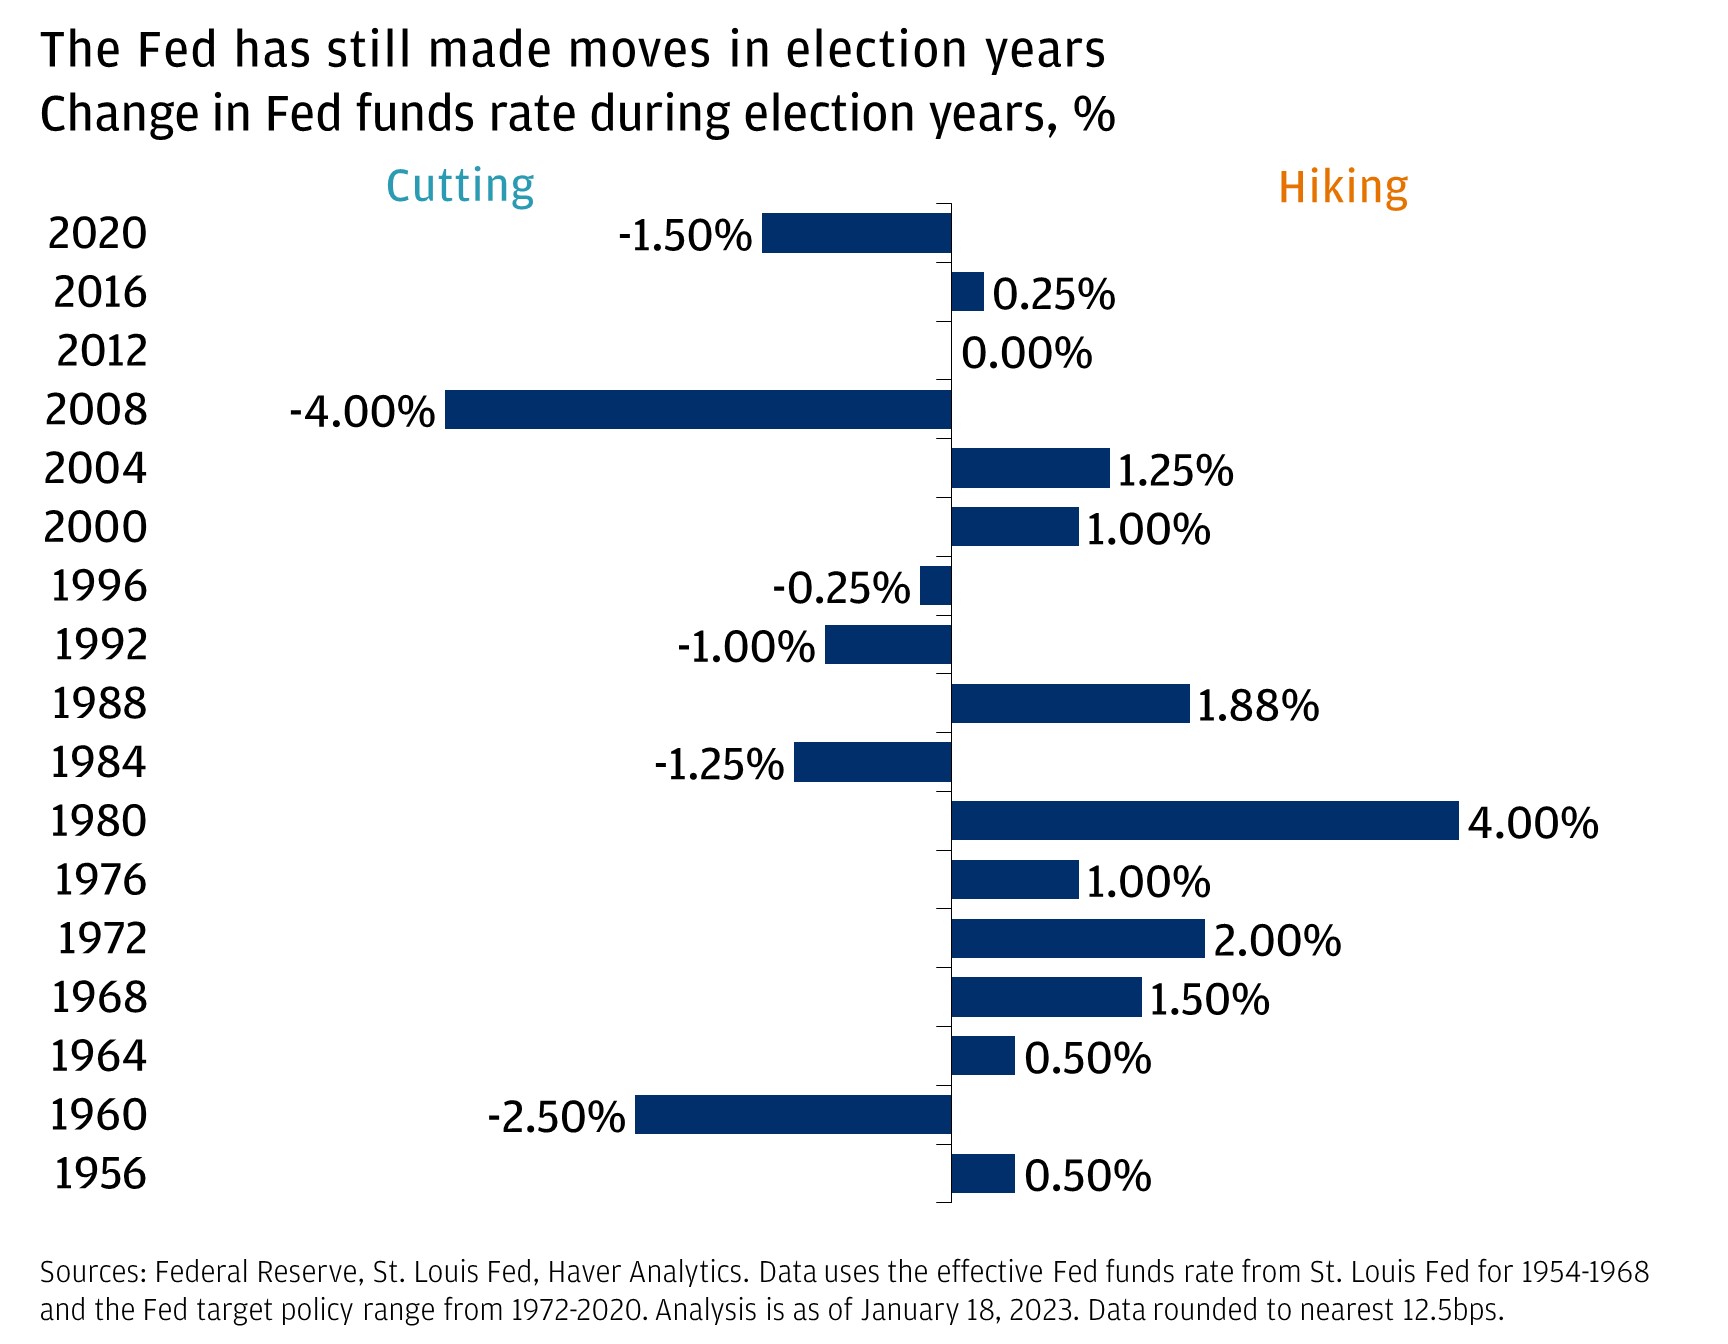 This chart shows the change in Fed Funds rate during election years